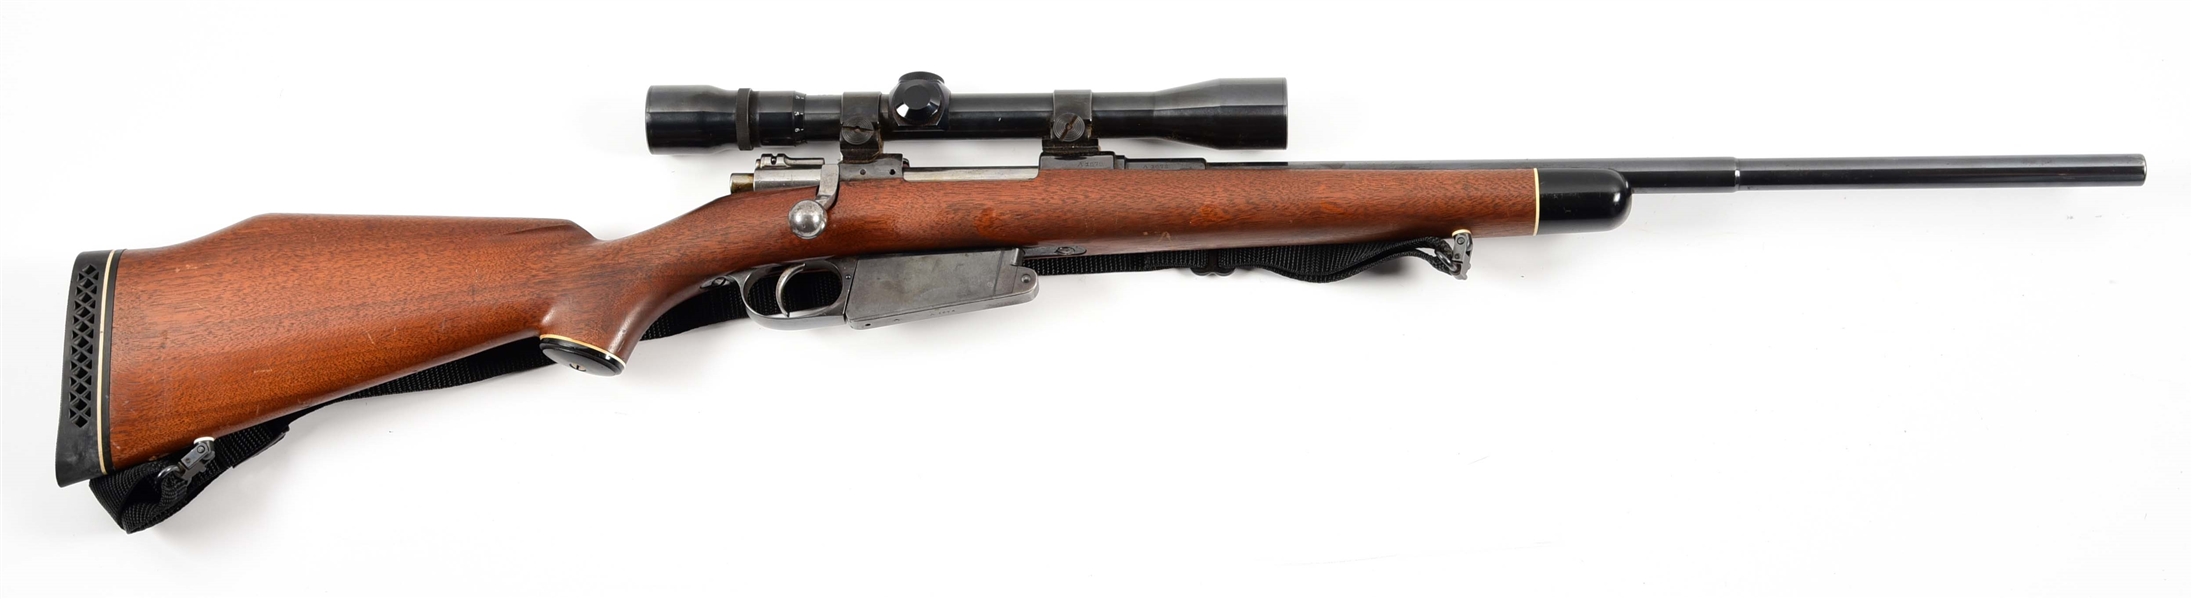 (A) SPORTERIZED LOEWE ARGENTINE 1891 MAUSER BOLT ACTION RIFLE